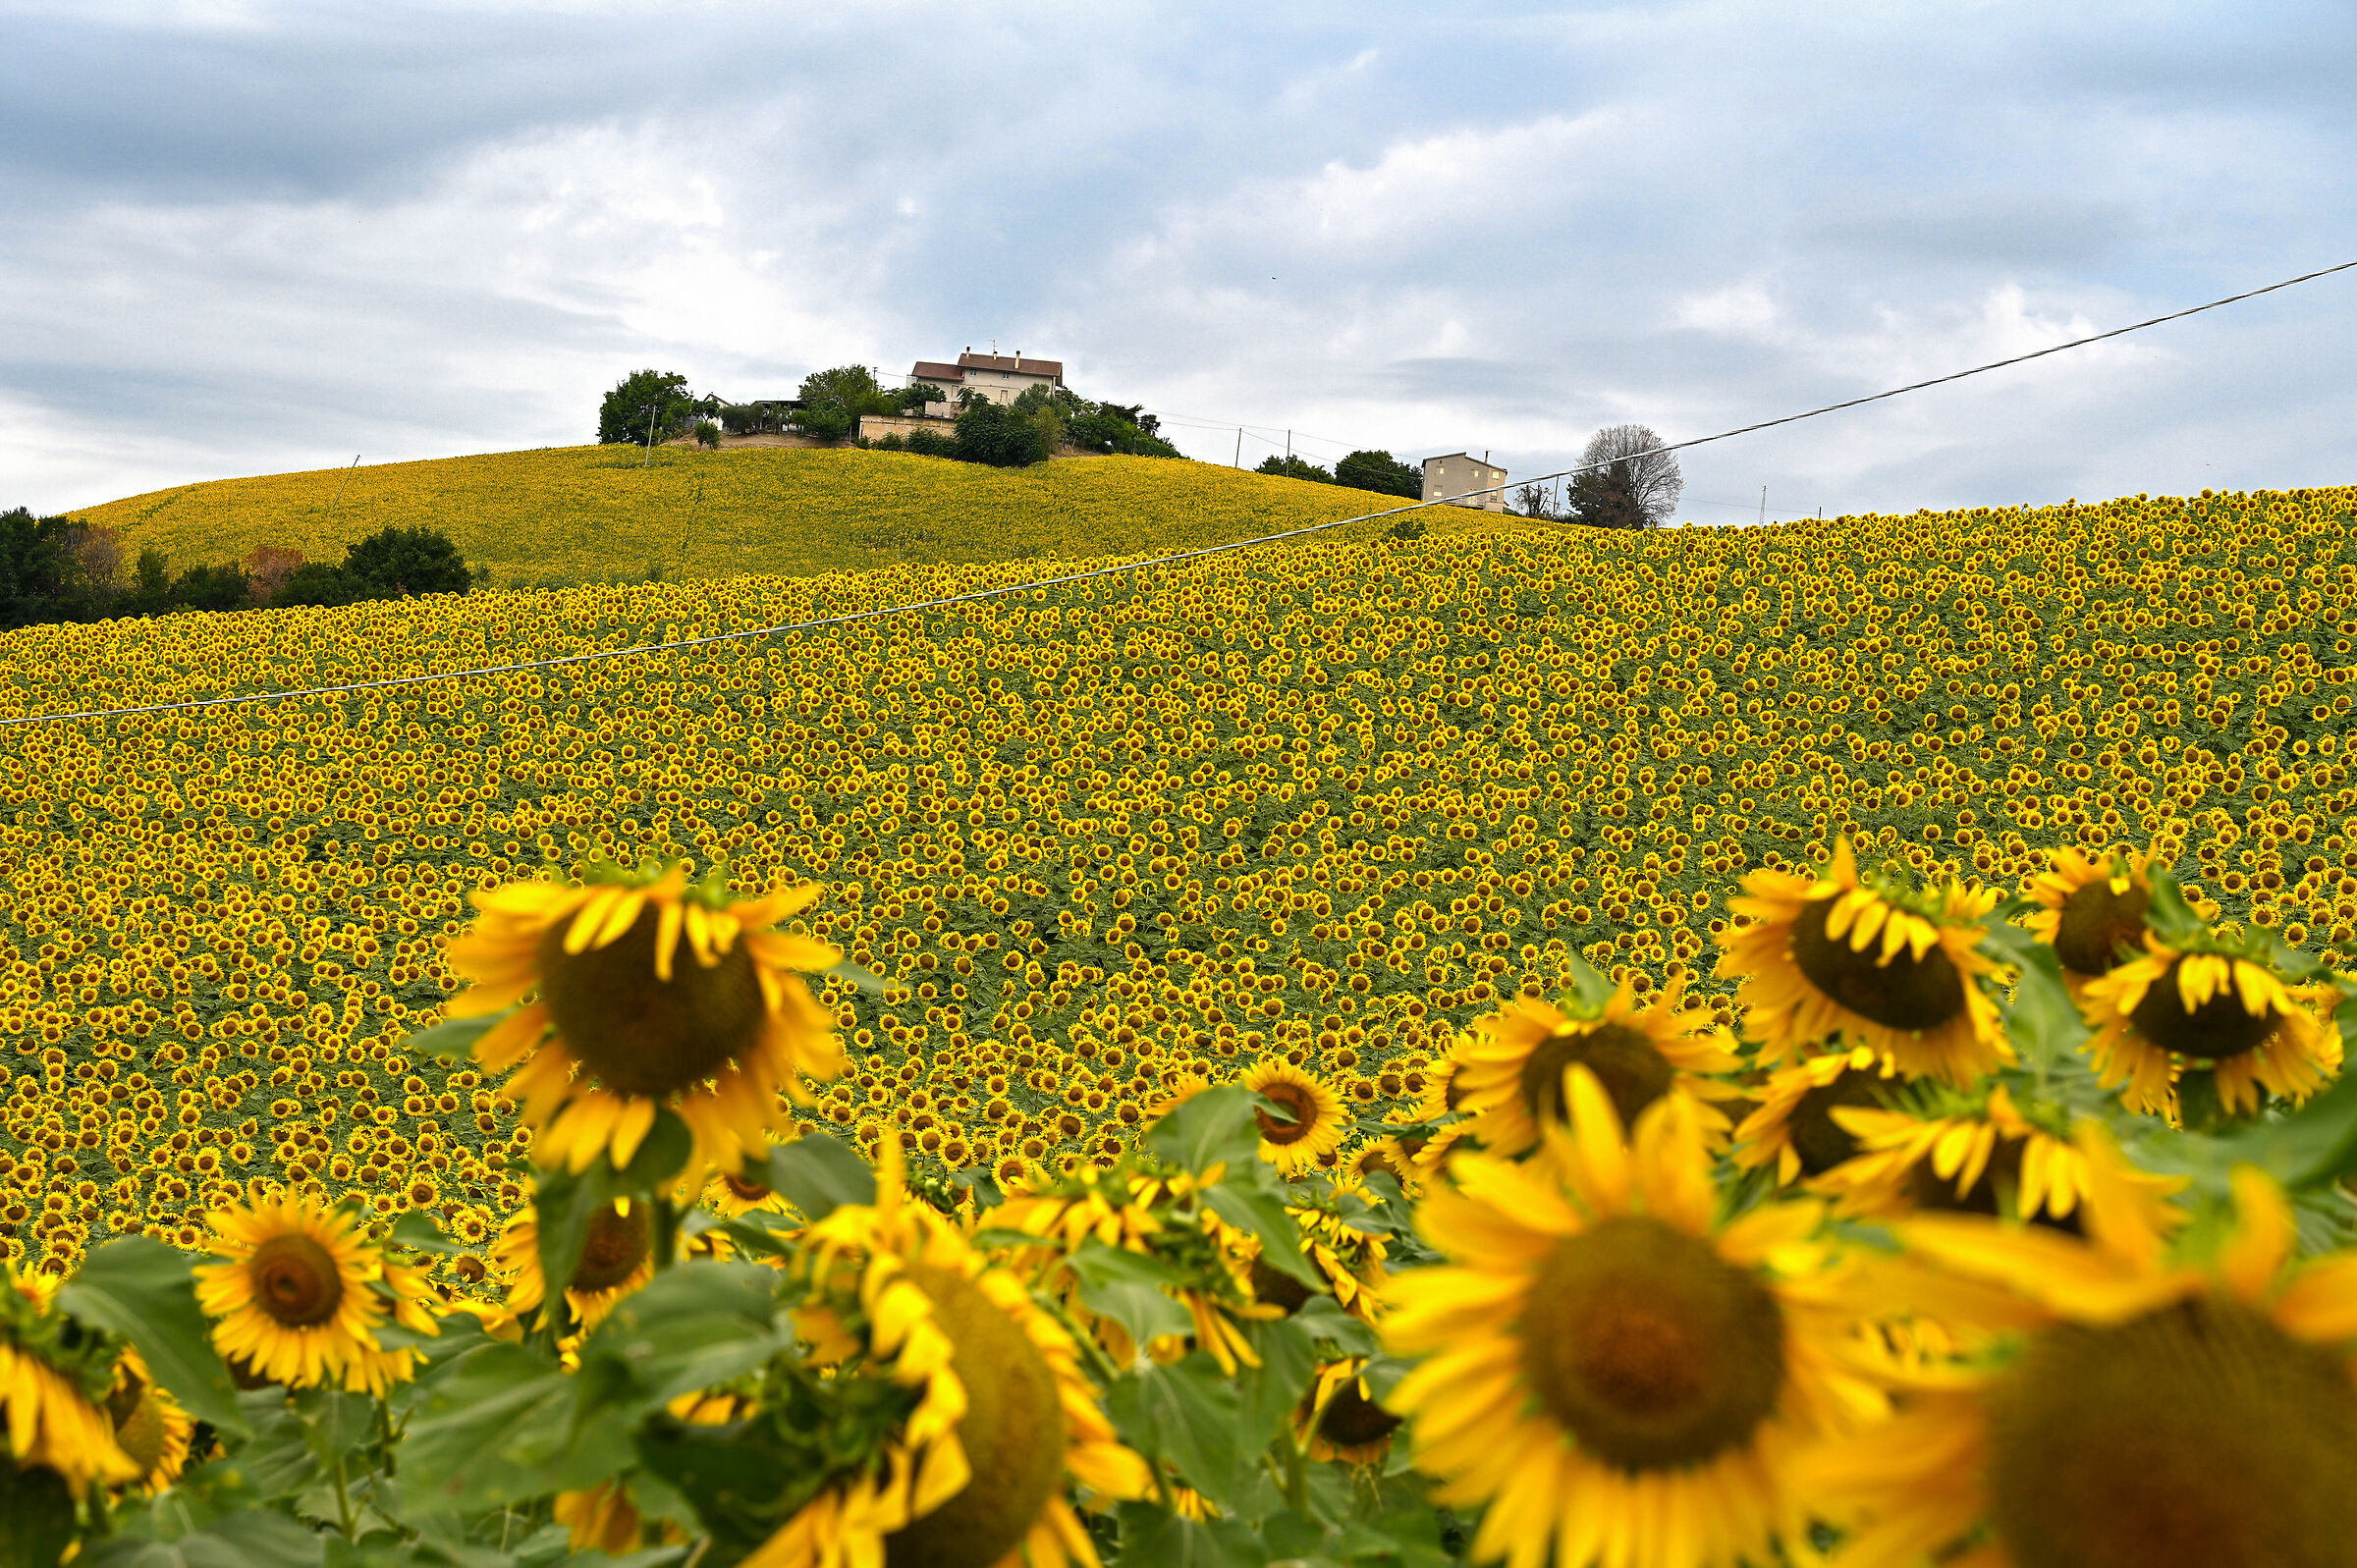 Home among the Sunflowers .... Marche landscape....